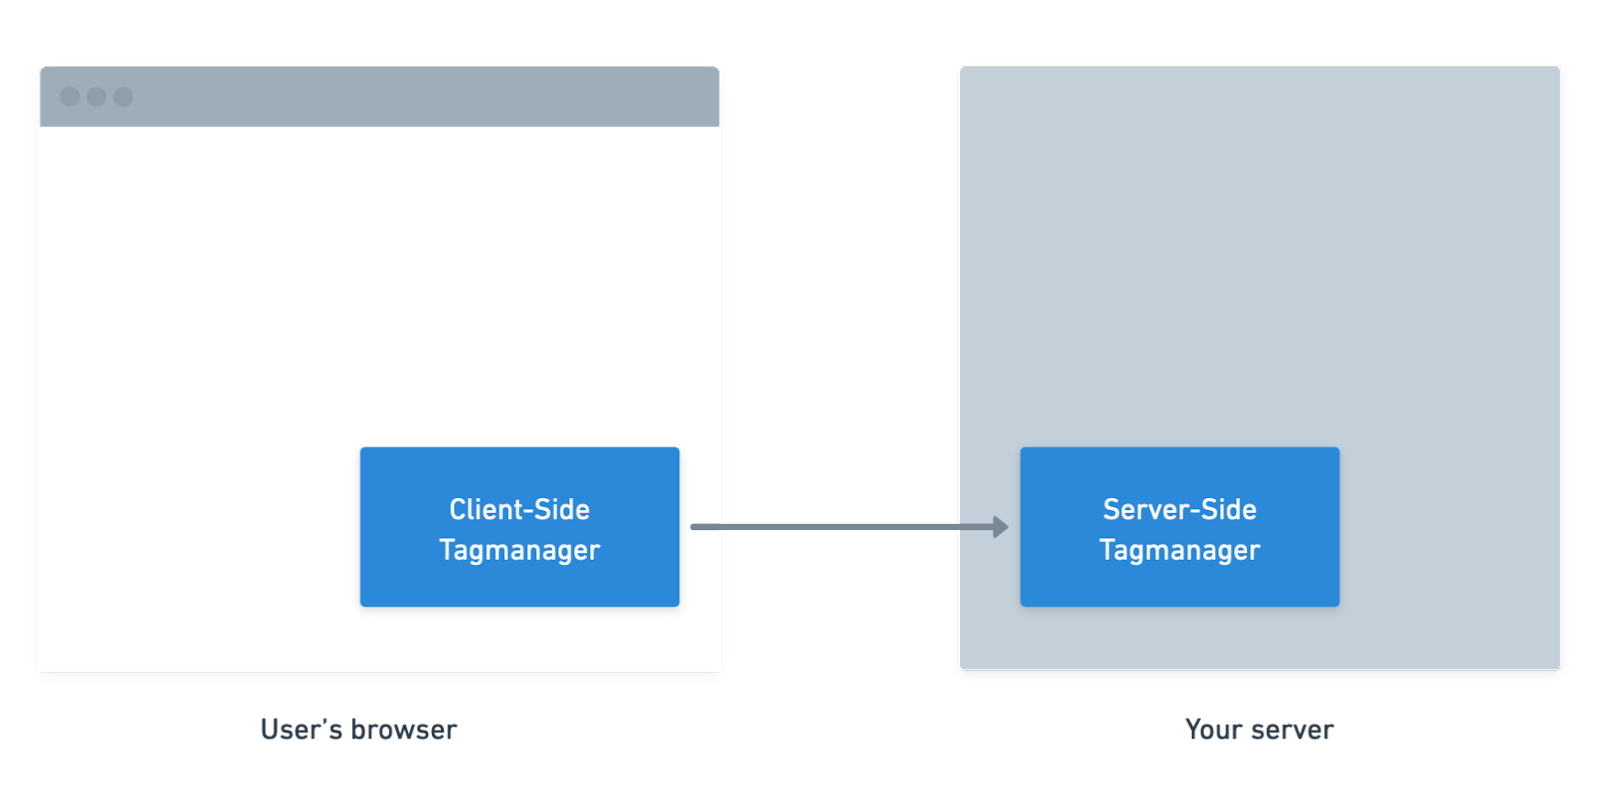 While client-side tag managers reside in your browser (less secure), server-side tag managers reside in your server (more secure)